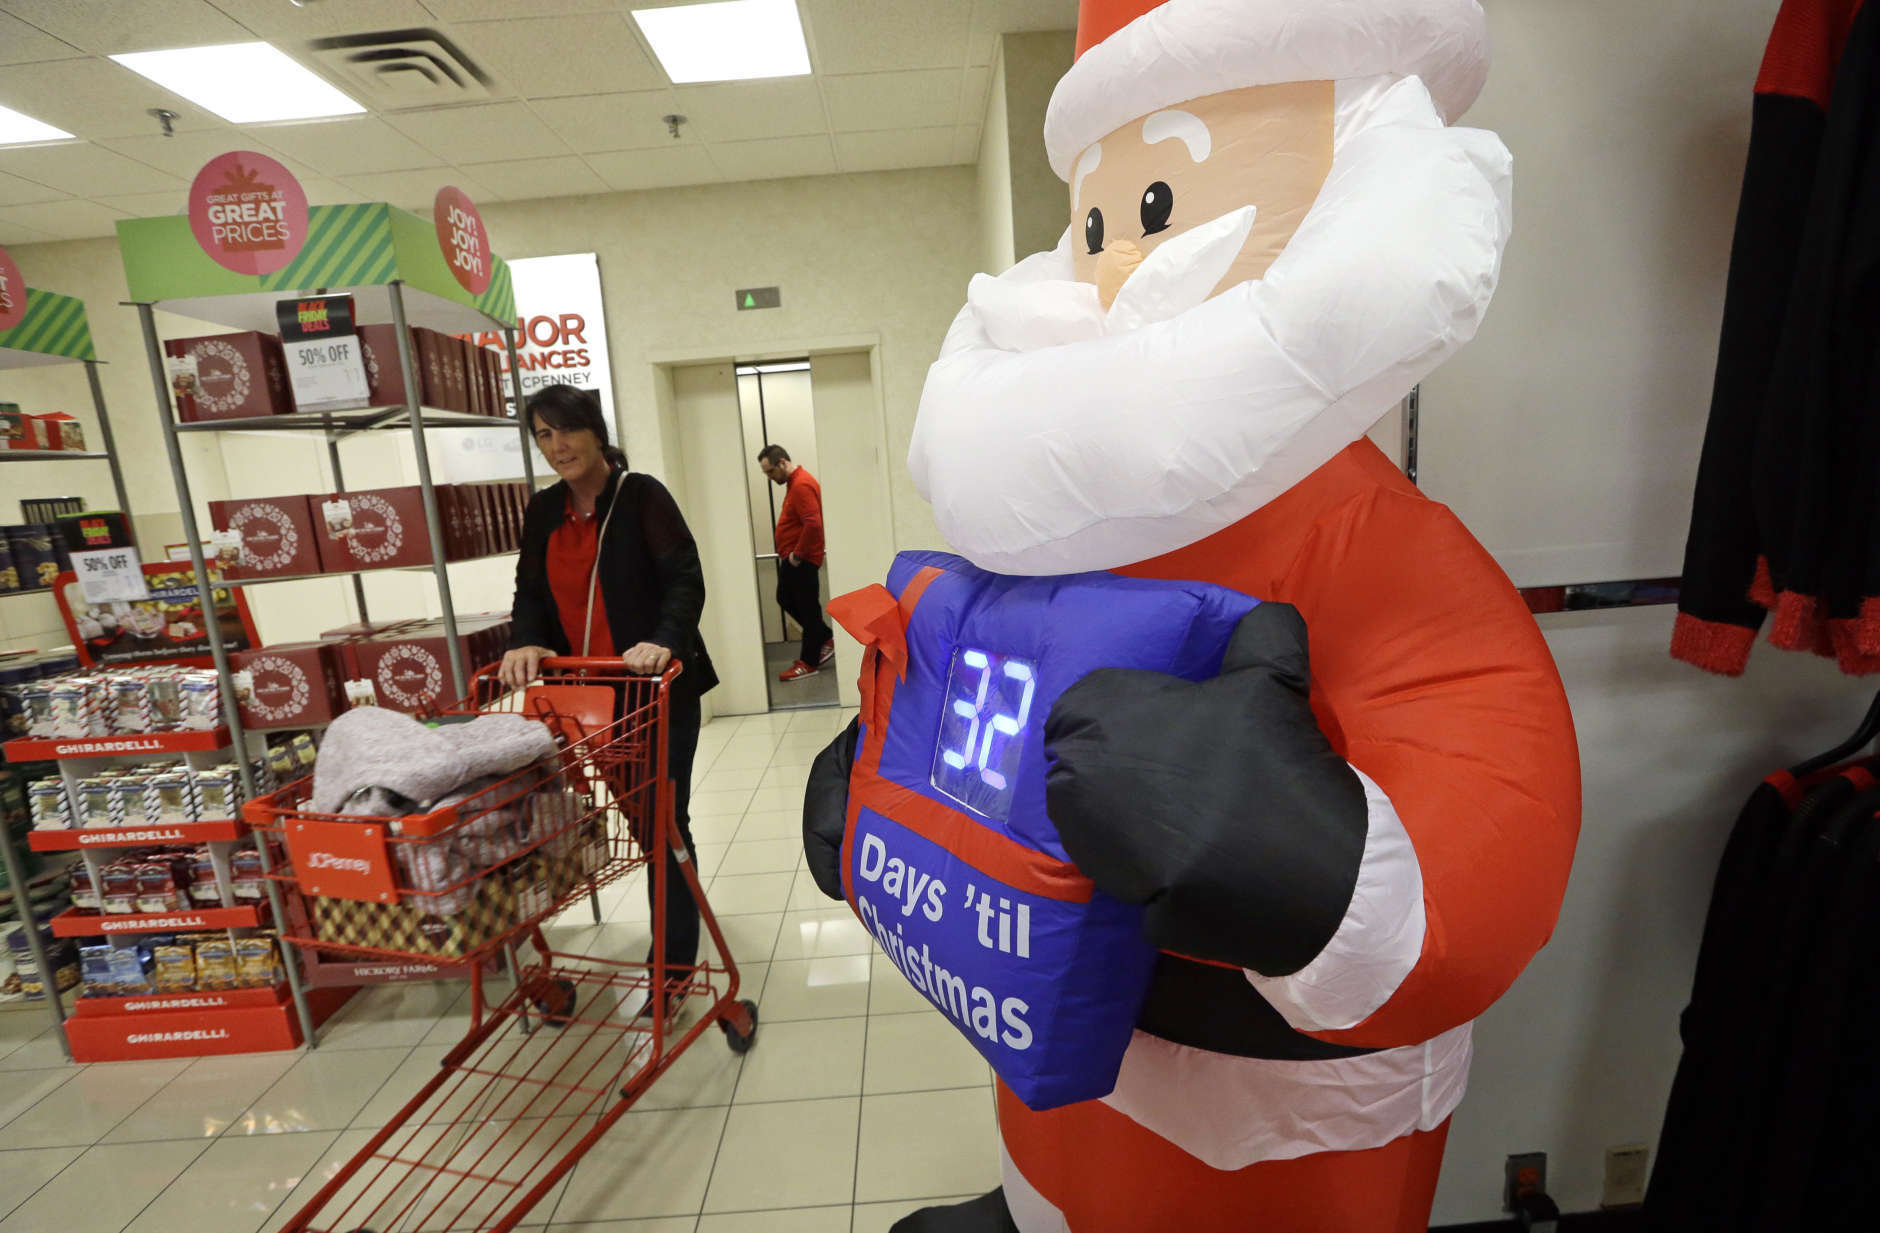 A shopper rolls a full cart past a Santa figure with a countdown clock numbering the days until Christmas at a J.C. Penney store, Friday, Nov. 24, 2017, in Seattle. Black Friday has morphed from a single day when people got up early to score doorbusters into a whole season of deals, so shoppers may feel less need to be out. (AP Photo/Elaine Thompson)